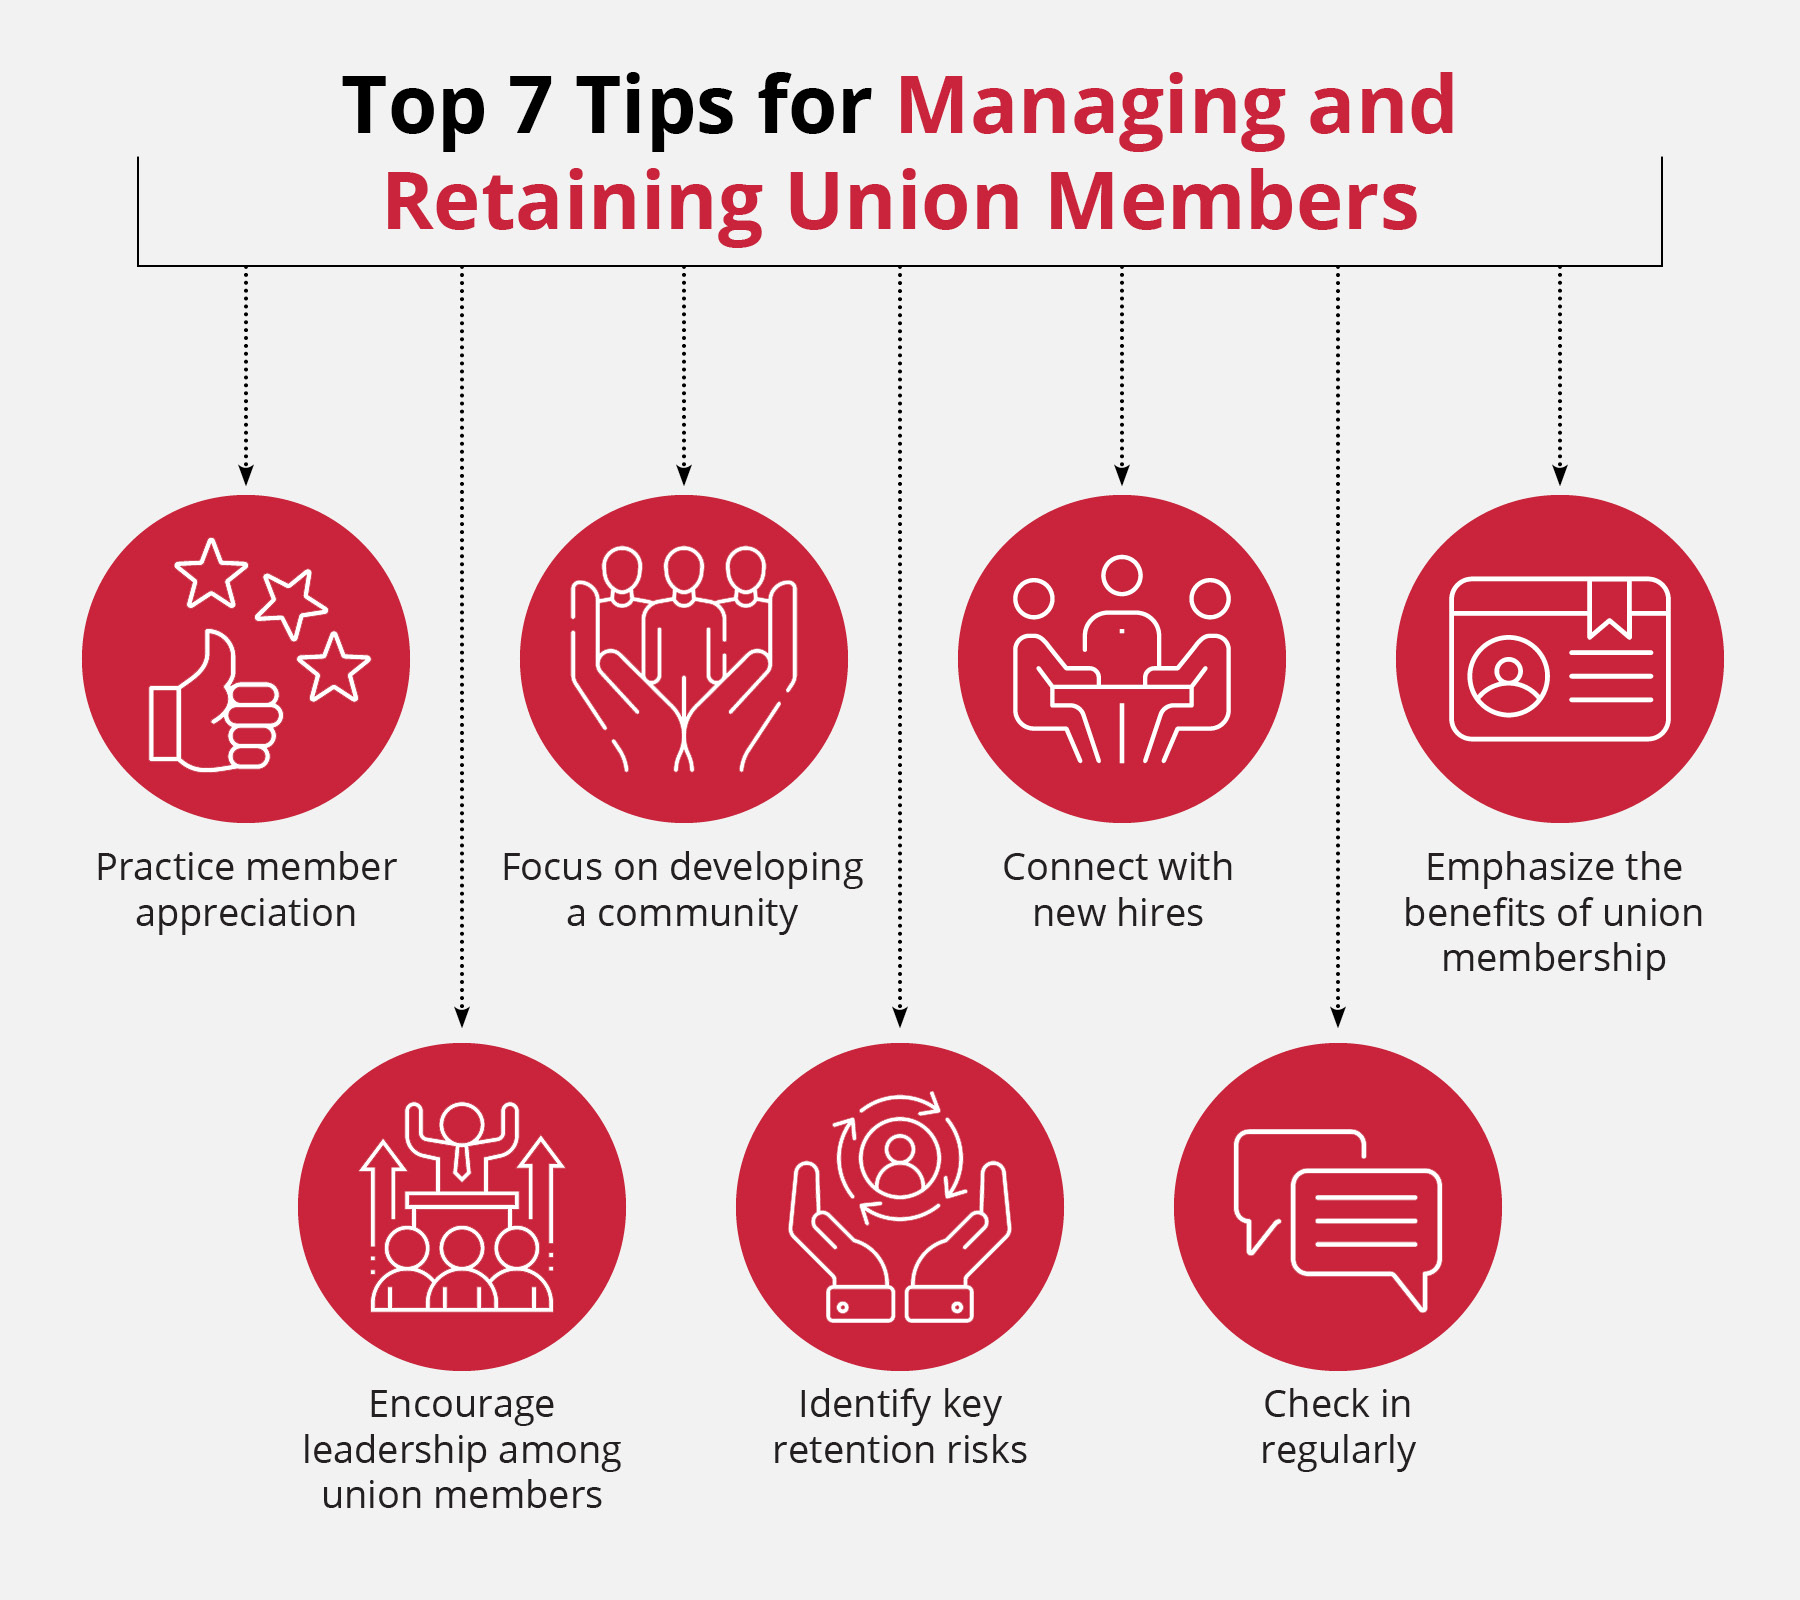  Follow these seven tips to manage and retain union members effectively.